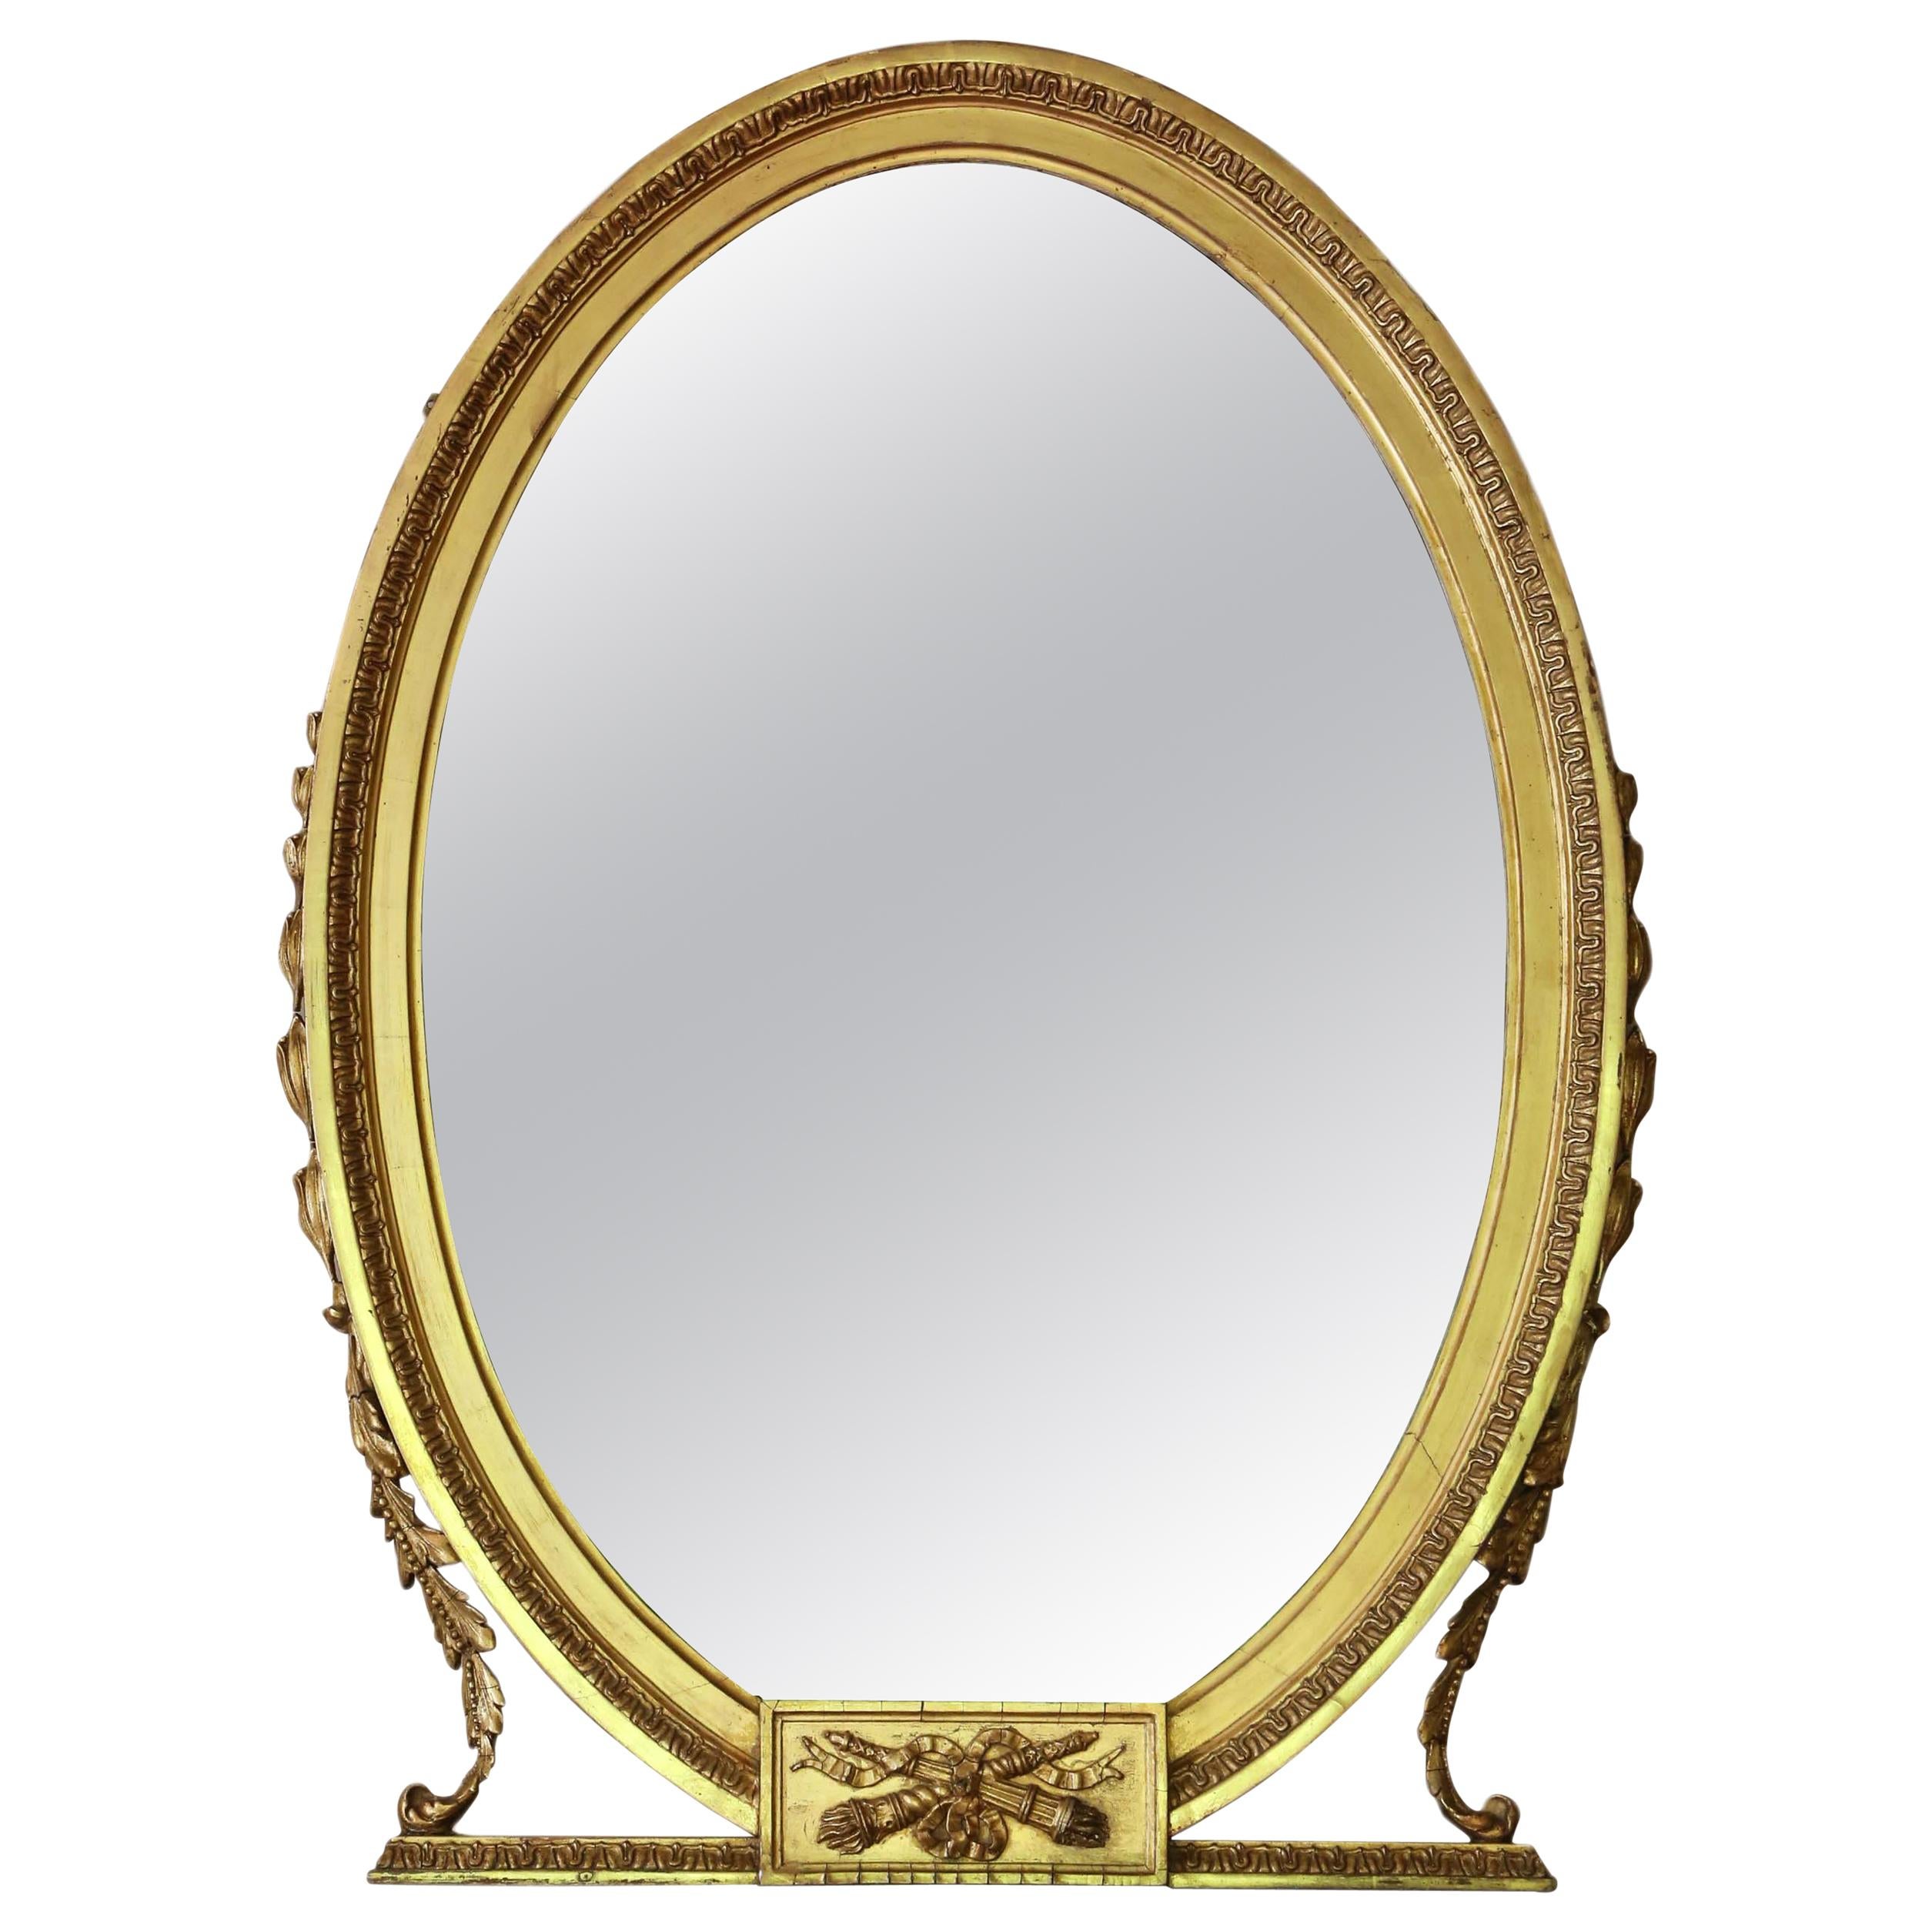 Antique Large Gilt Oval Overmantle or Wall Mirror, circa 1900